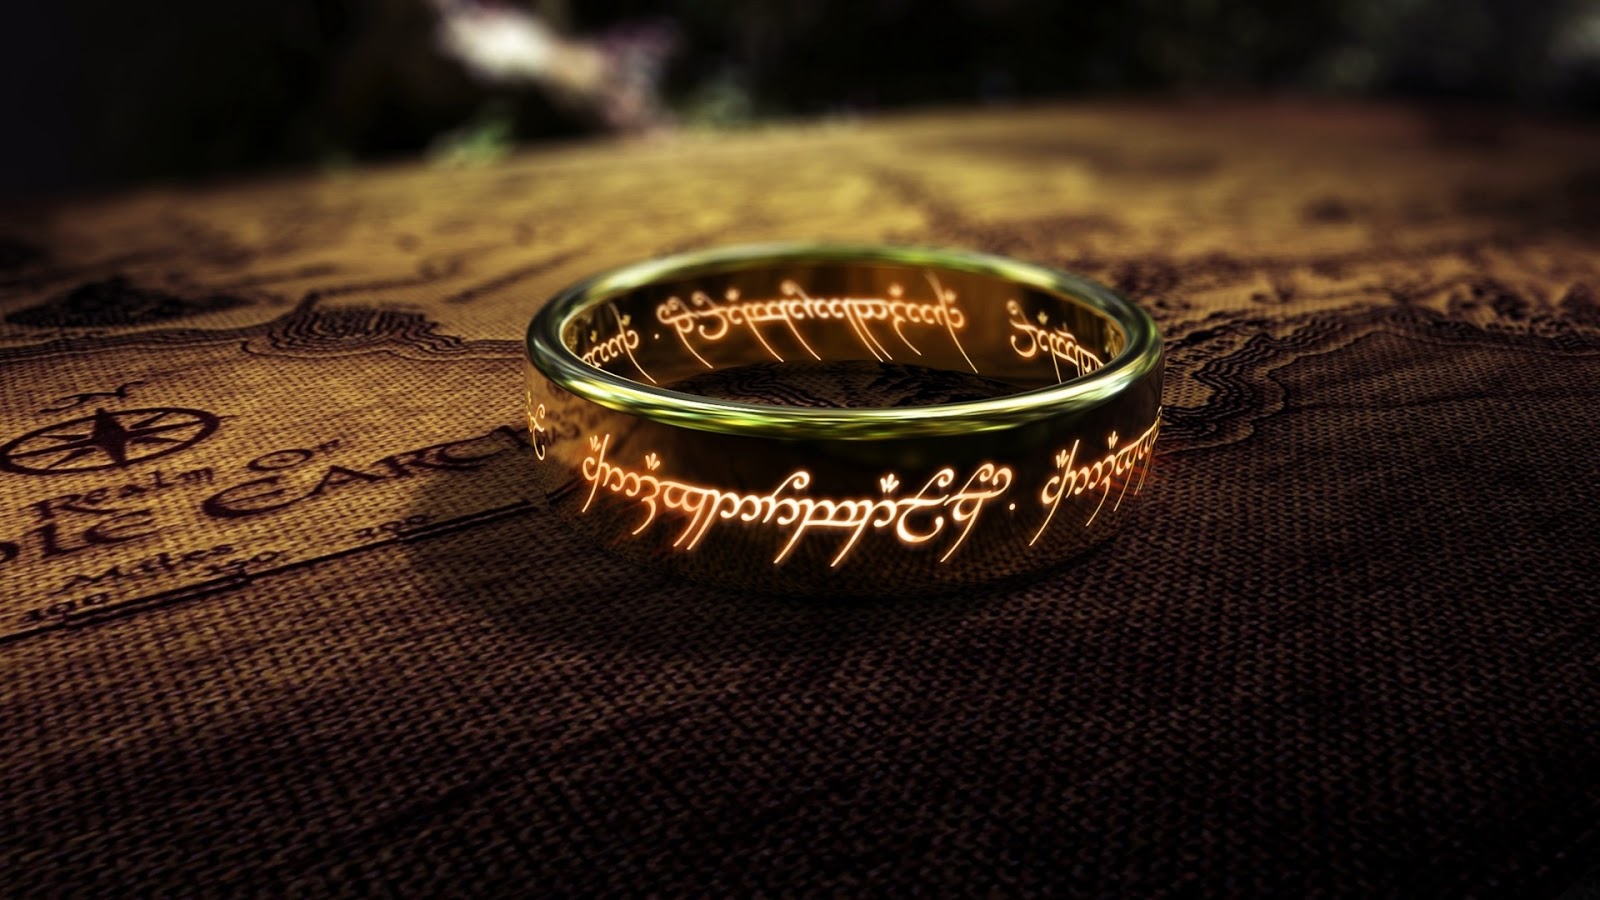 Download The Lord Of The Rings Wallpaper For Desktop and Mac Free